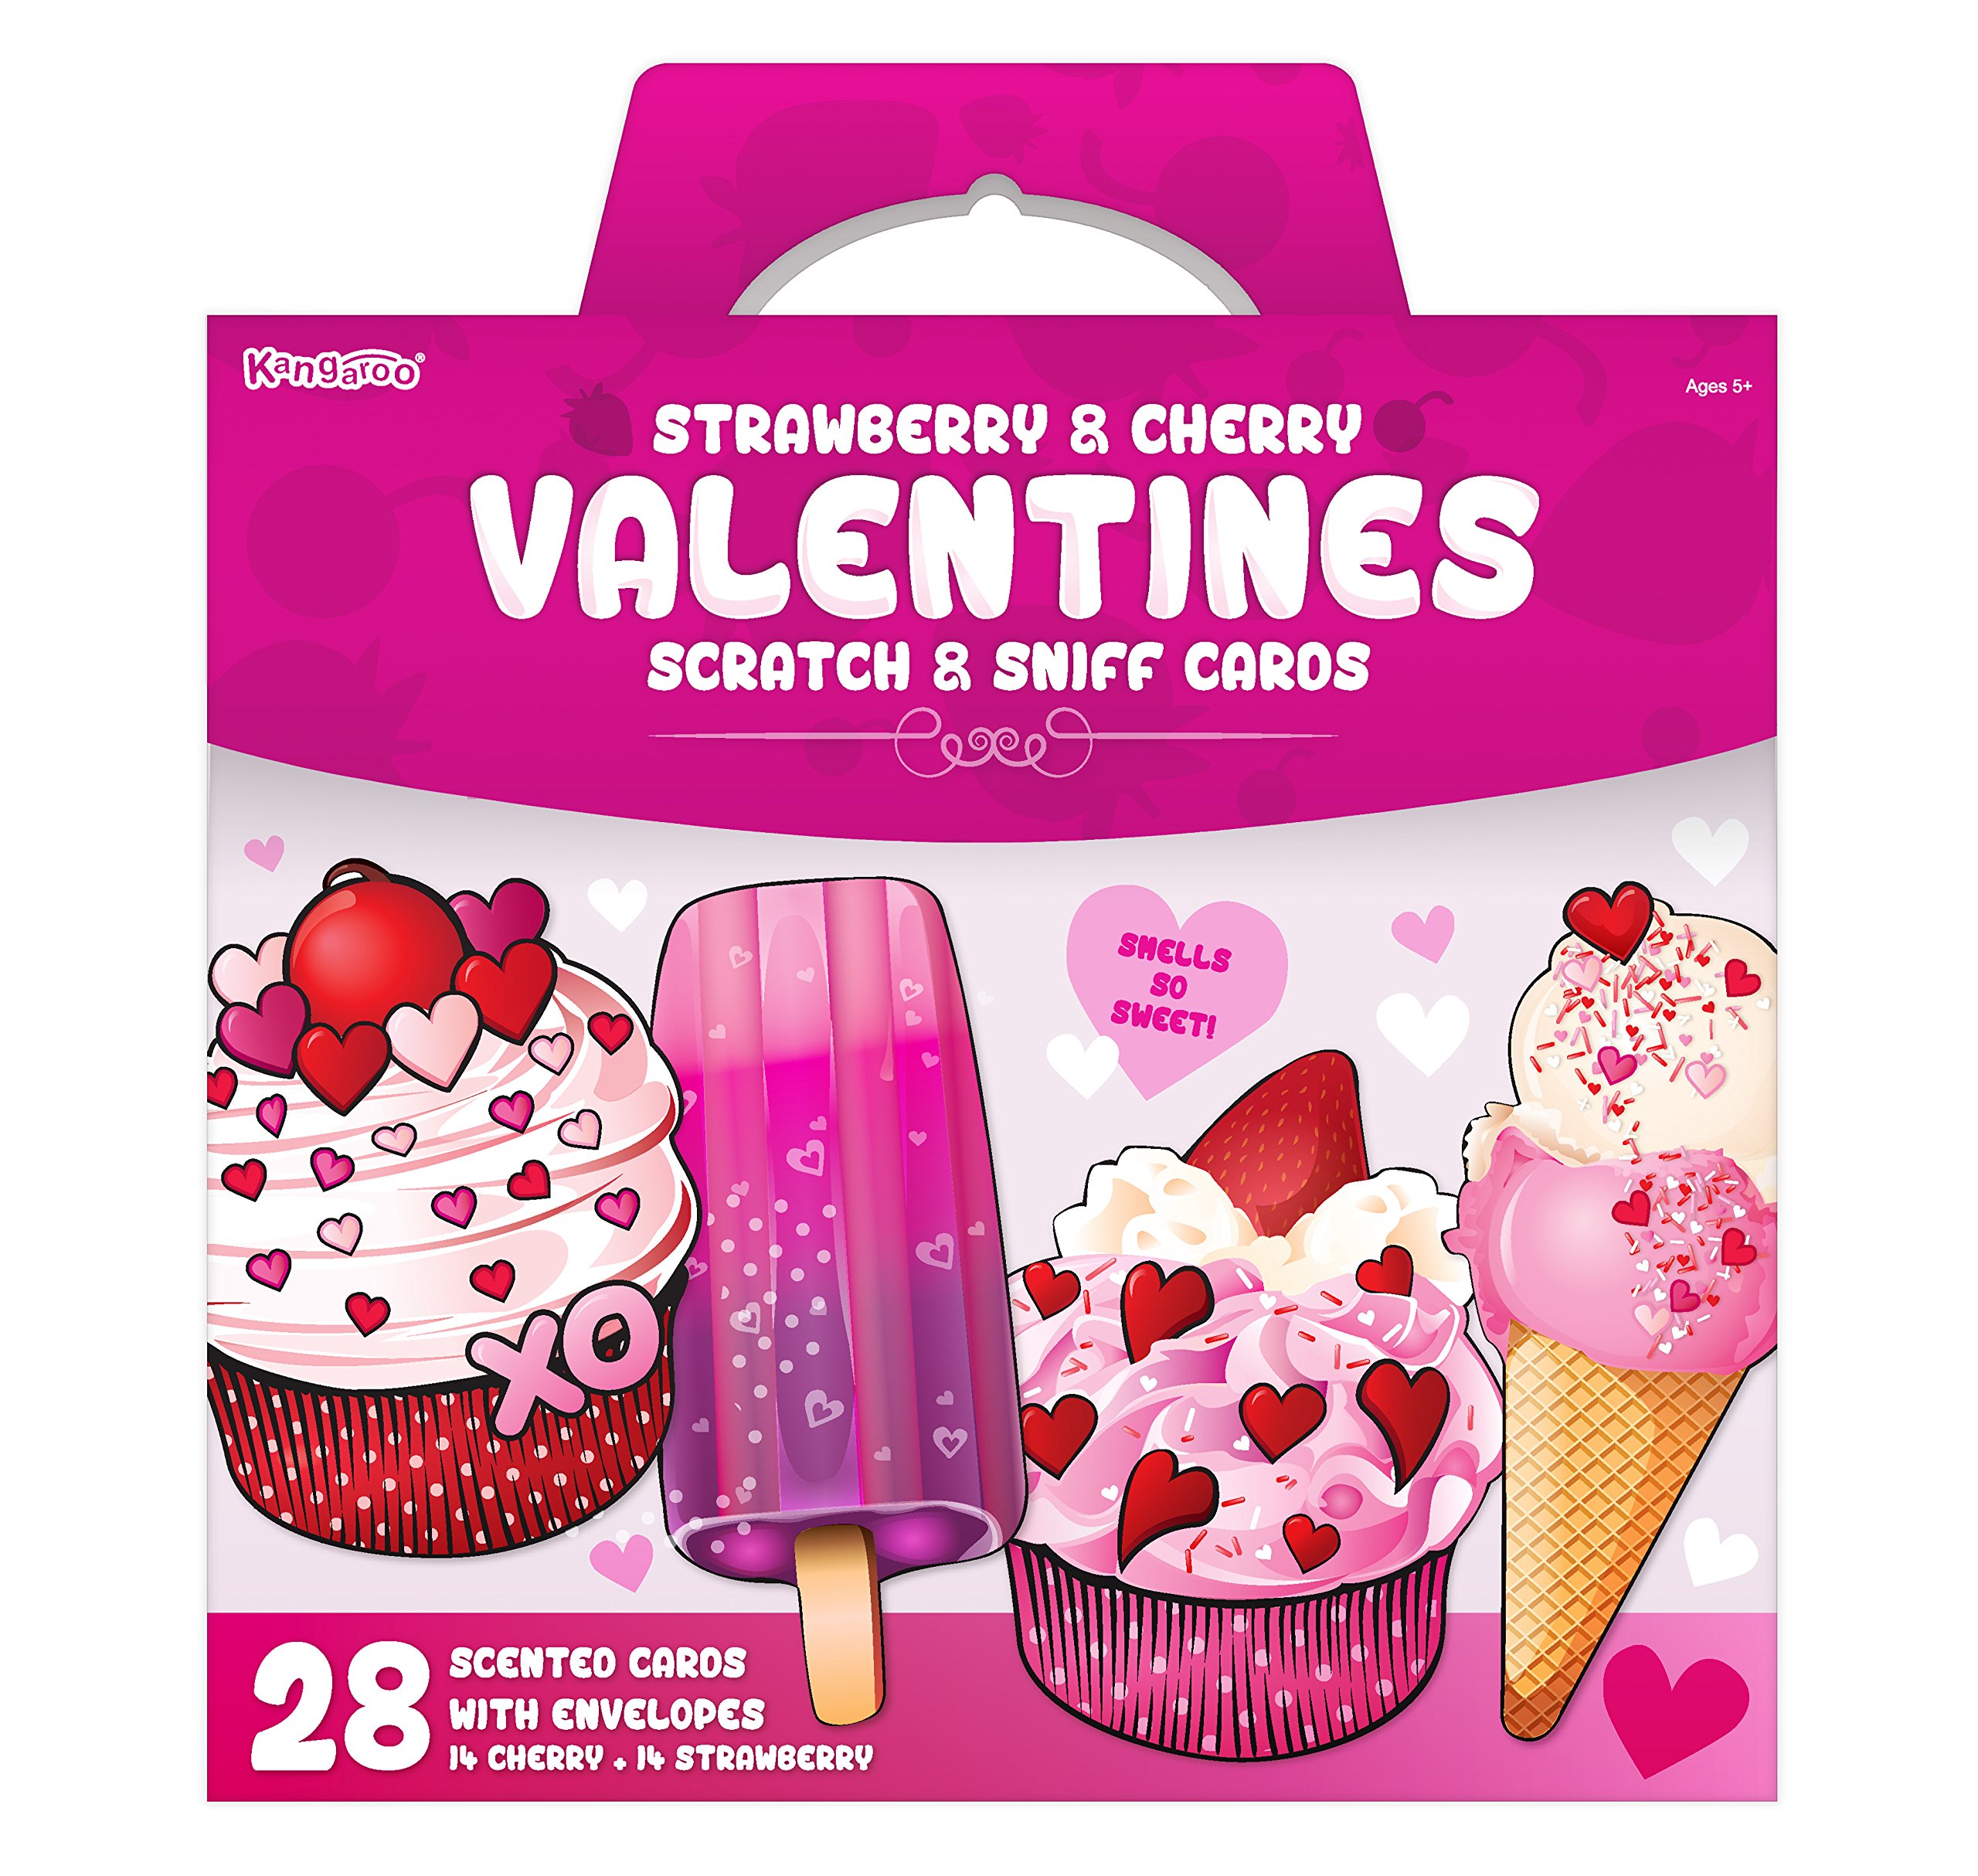 28-Pack Strawberry & Cherry Valentines Day Cards with Envelopes I Scratch & Sniff Valentines Day Cards for Kids School I Valentines Day Gifts for Kids Party Favor I Valentines Cards for Kids Classroom